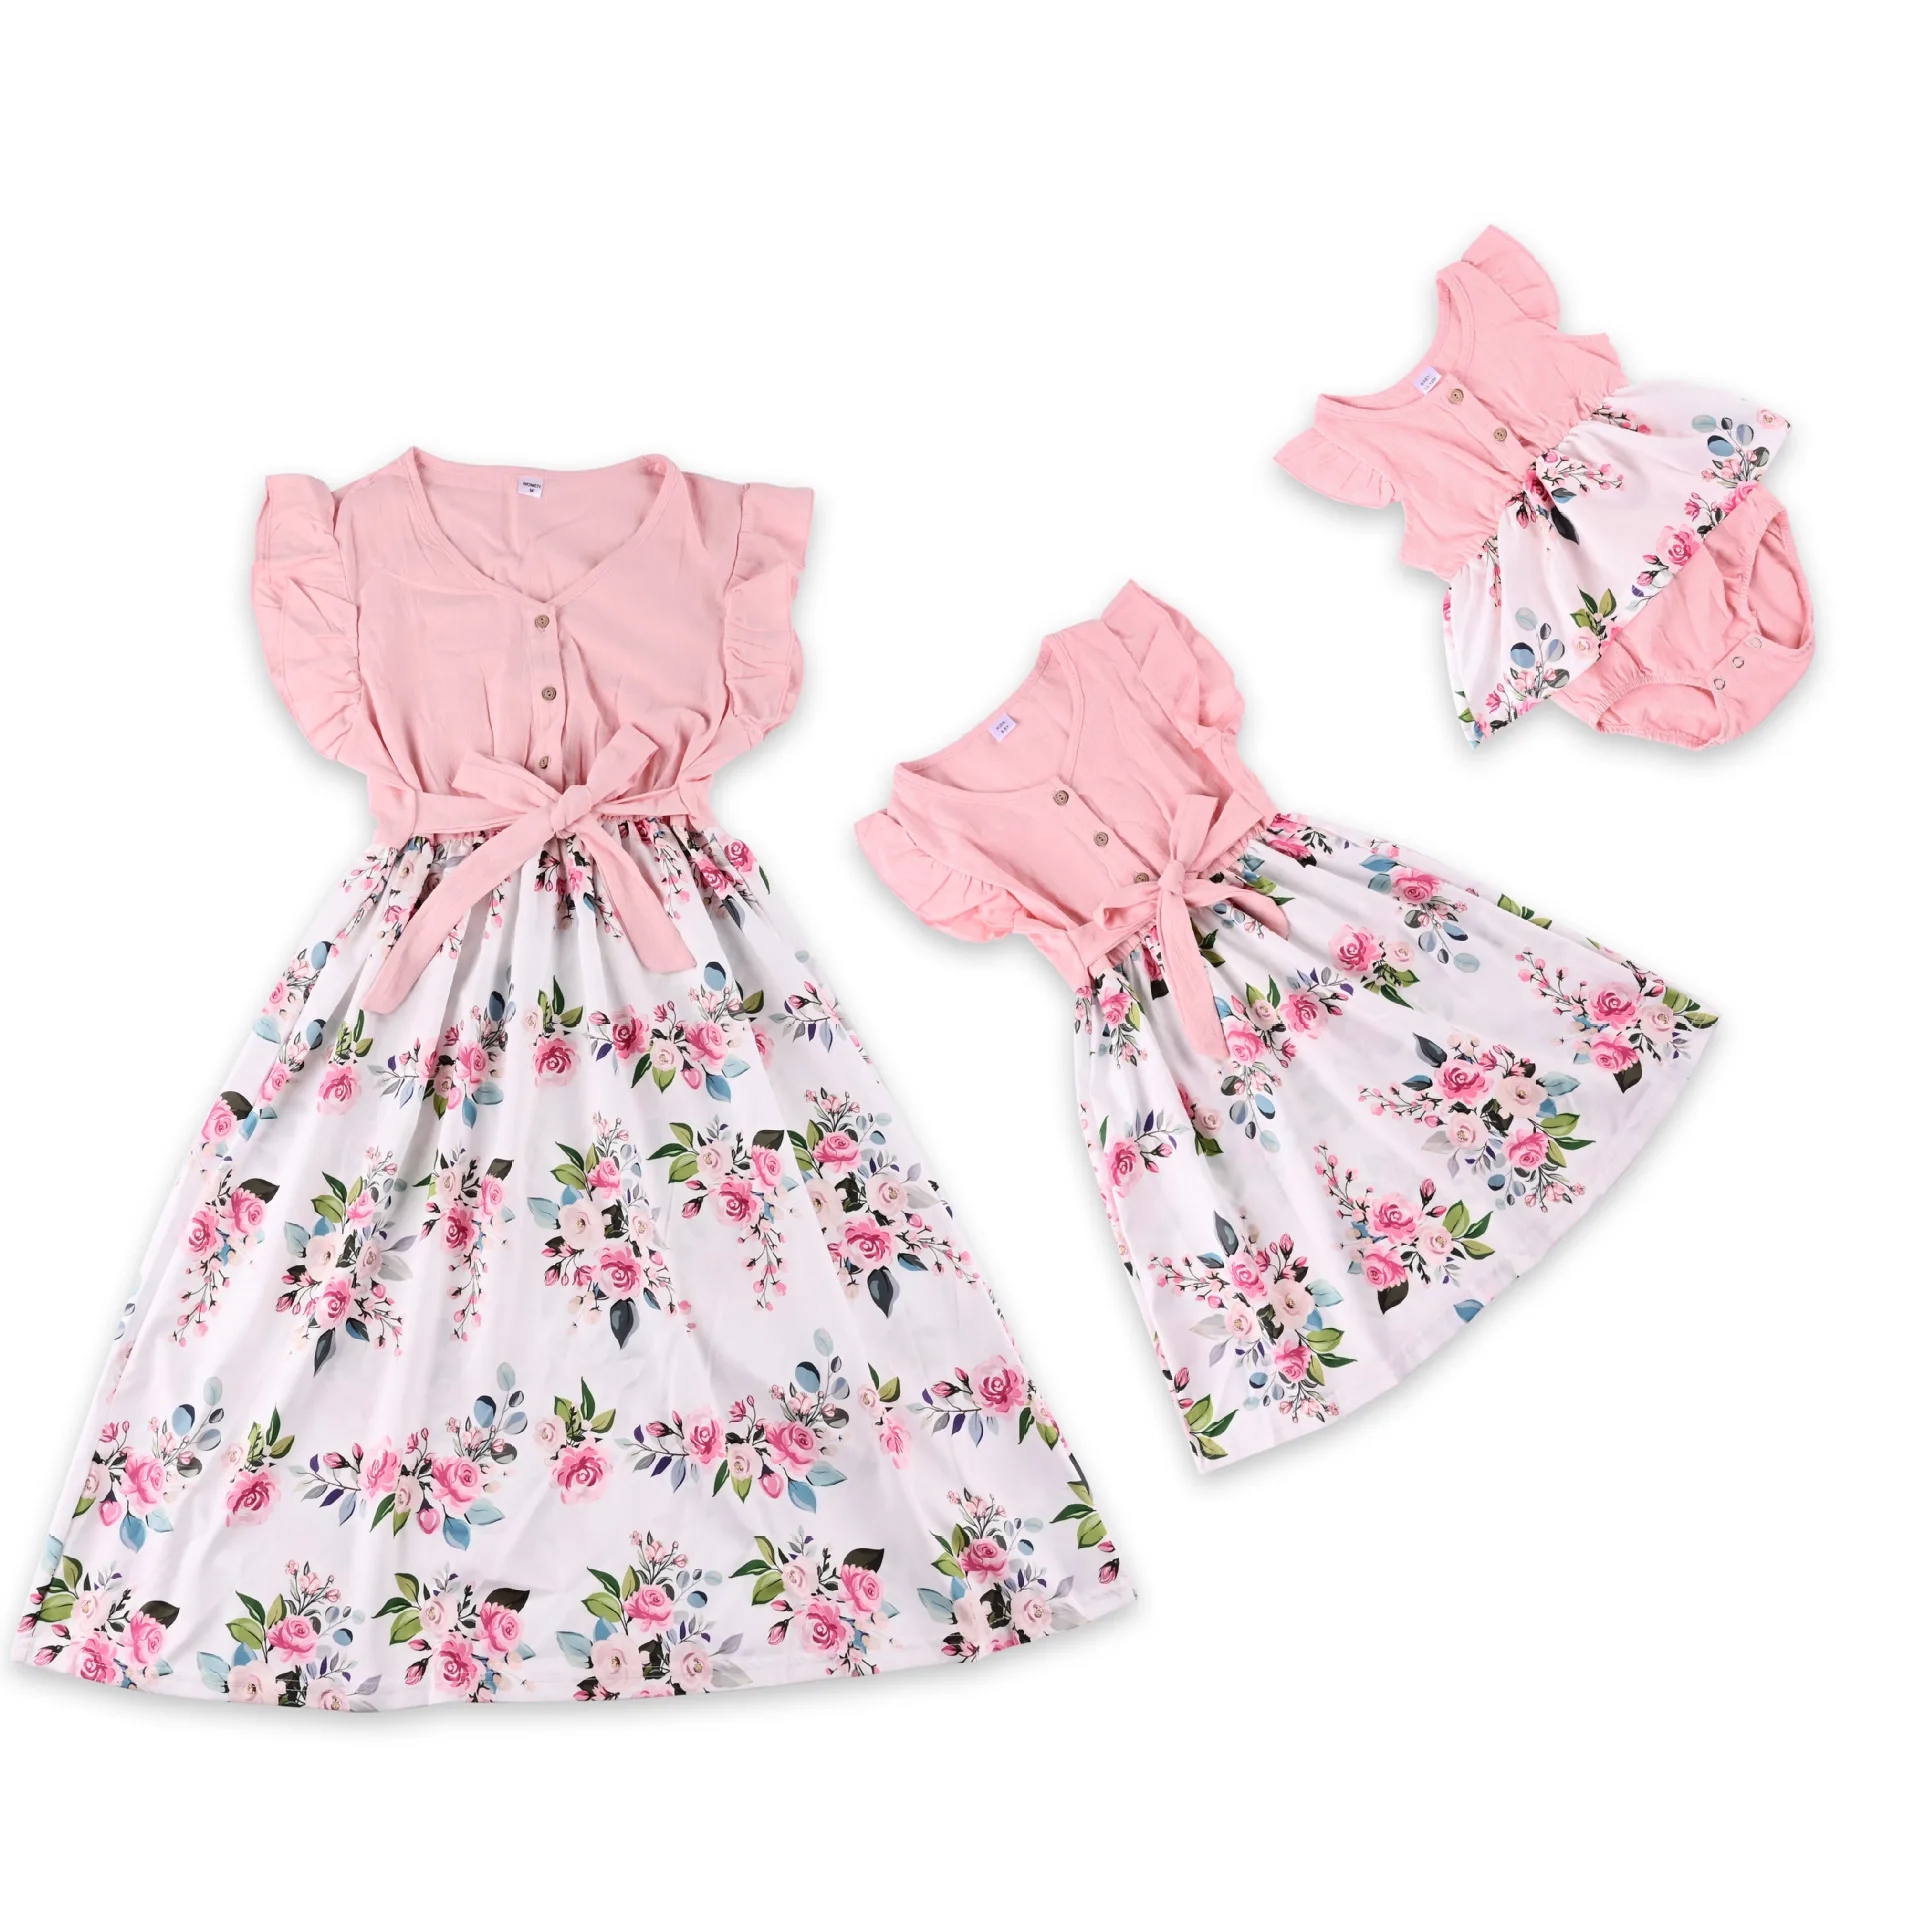 Mother Daughter Macthing Dresses Family Set Flower Mom Mum Baby Mommy and Me Clothes Fashion Cotton Dress Women Girls Outfits